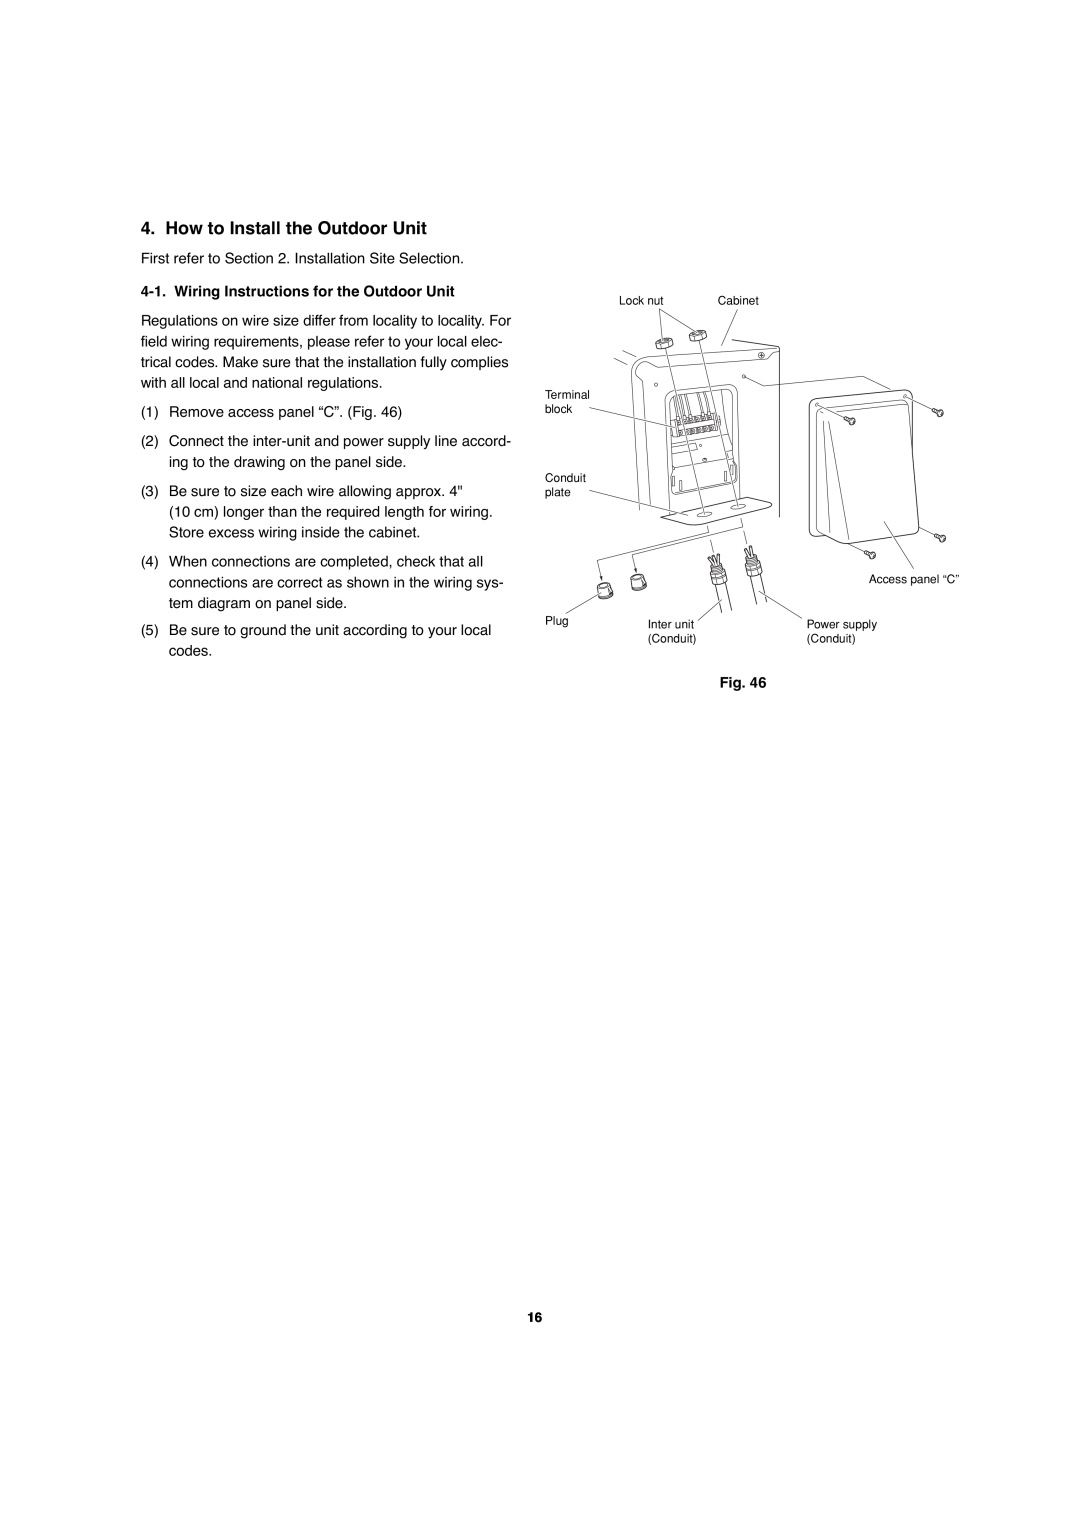 Sanyo CH0971, CH1271 service manual How to Install the Outdoor Unit, Wiring Instructions for the Outdoor Unit 